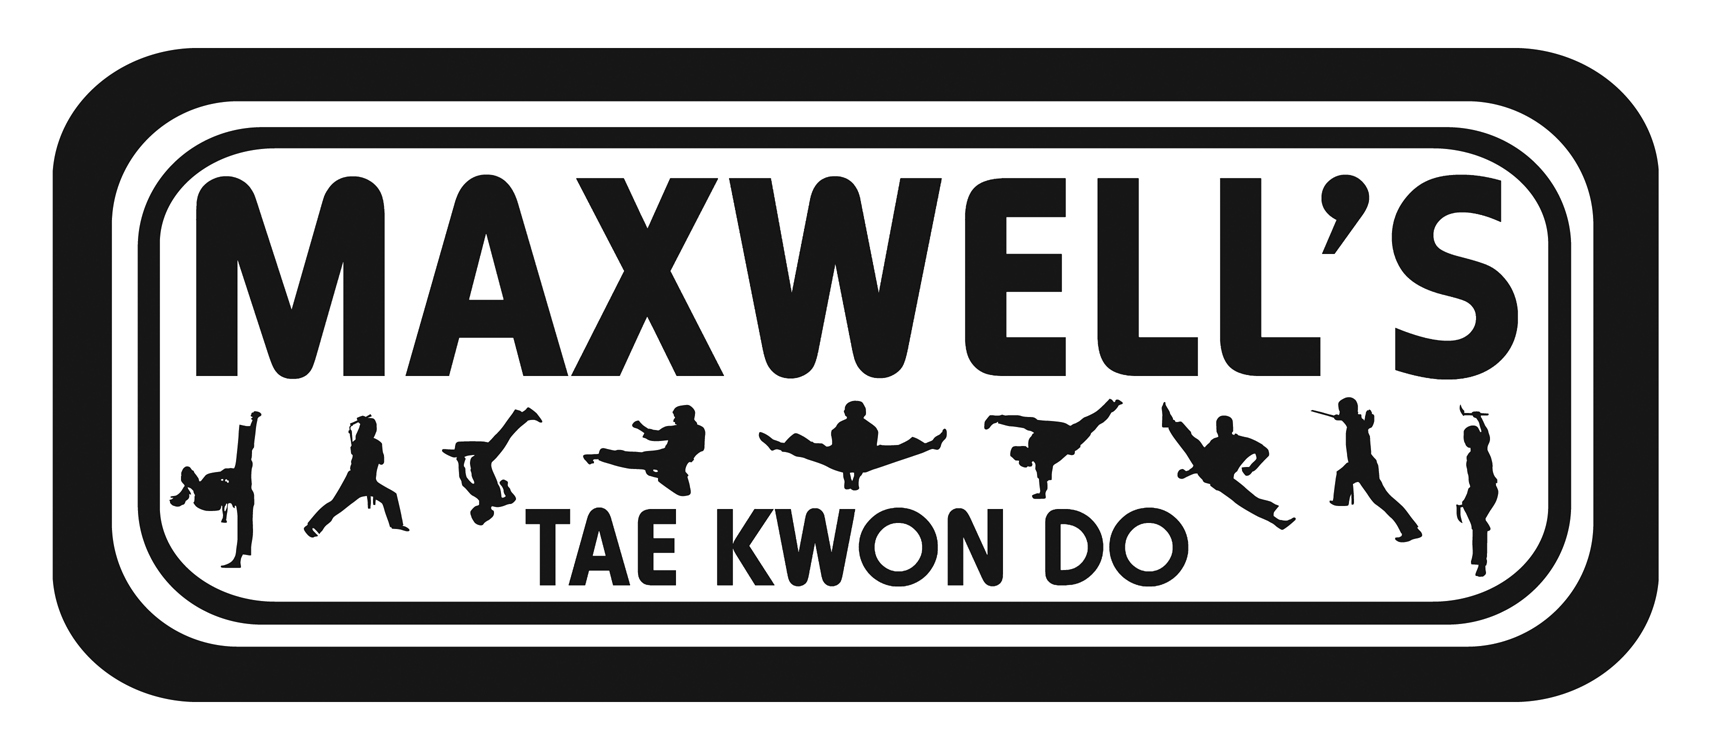 Maxwell's Tae Kwon Do